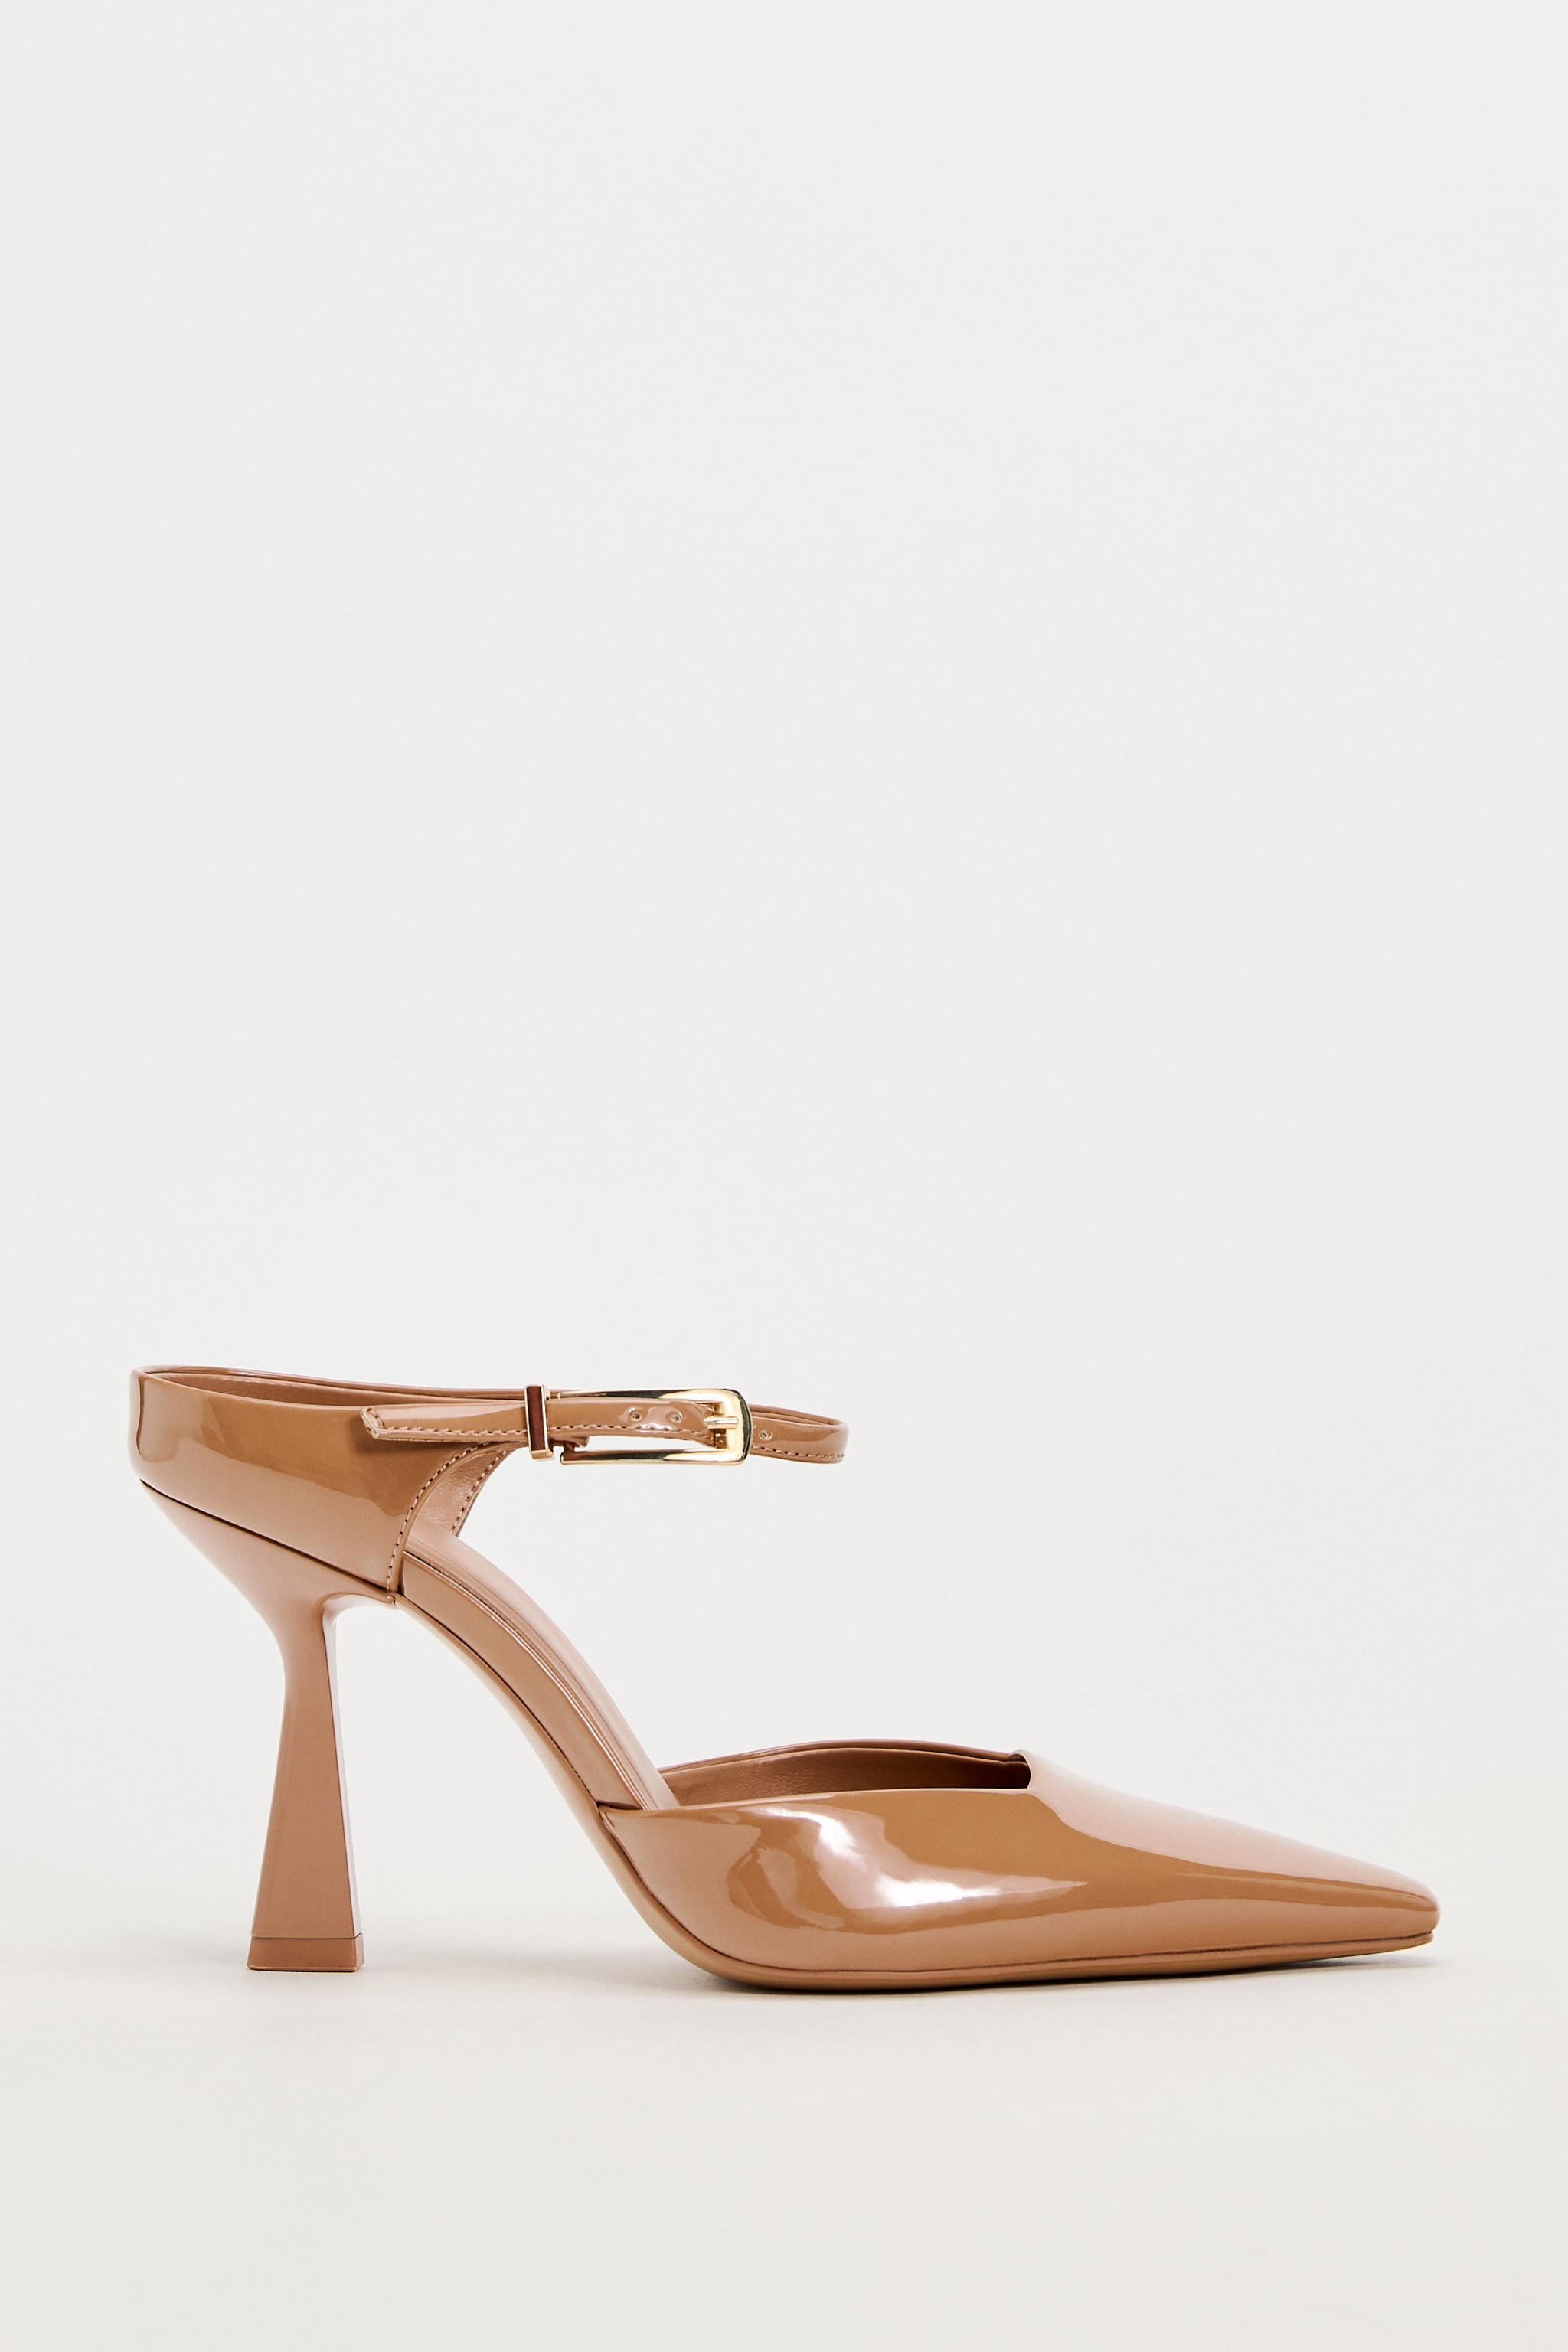 ZARA PATENT LEATHER POINTED TOE SANDAL IN CARAMEL